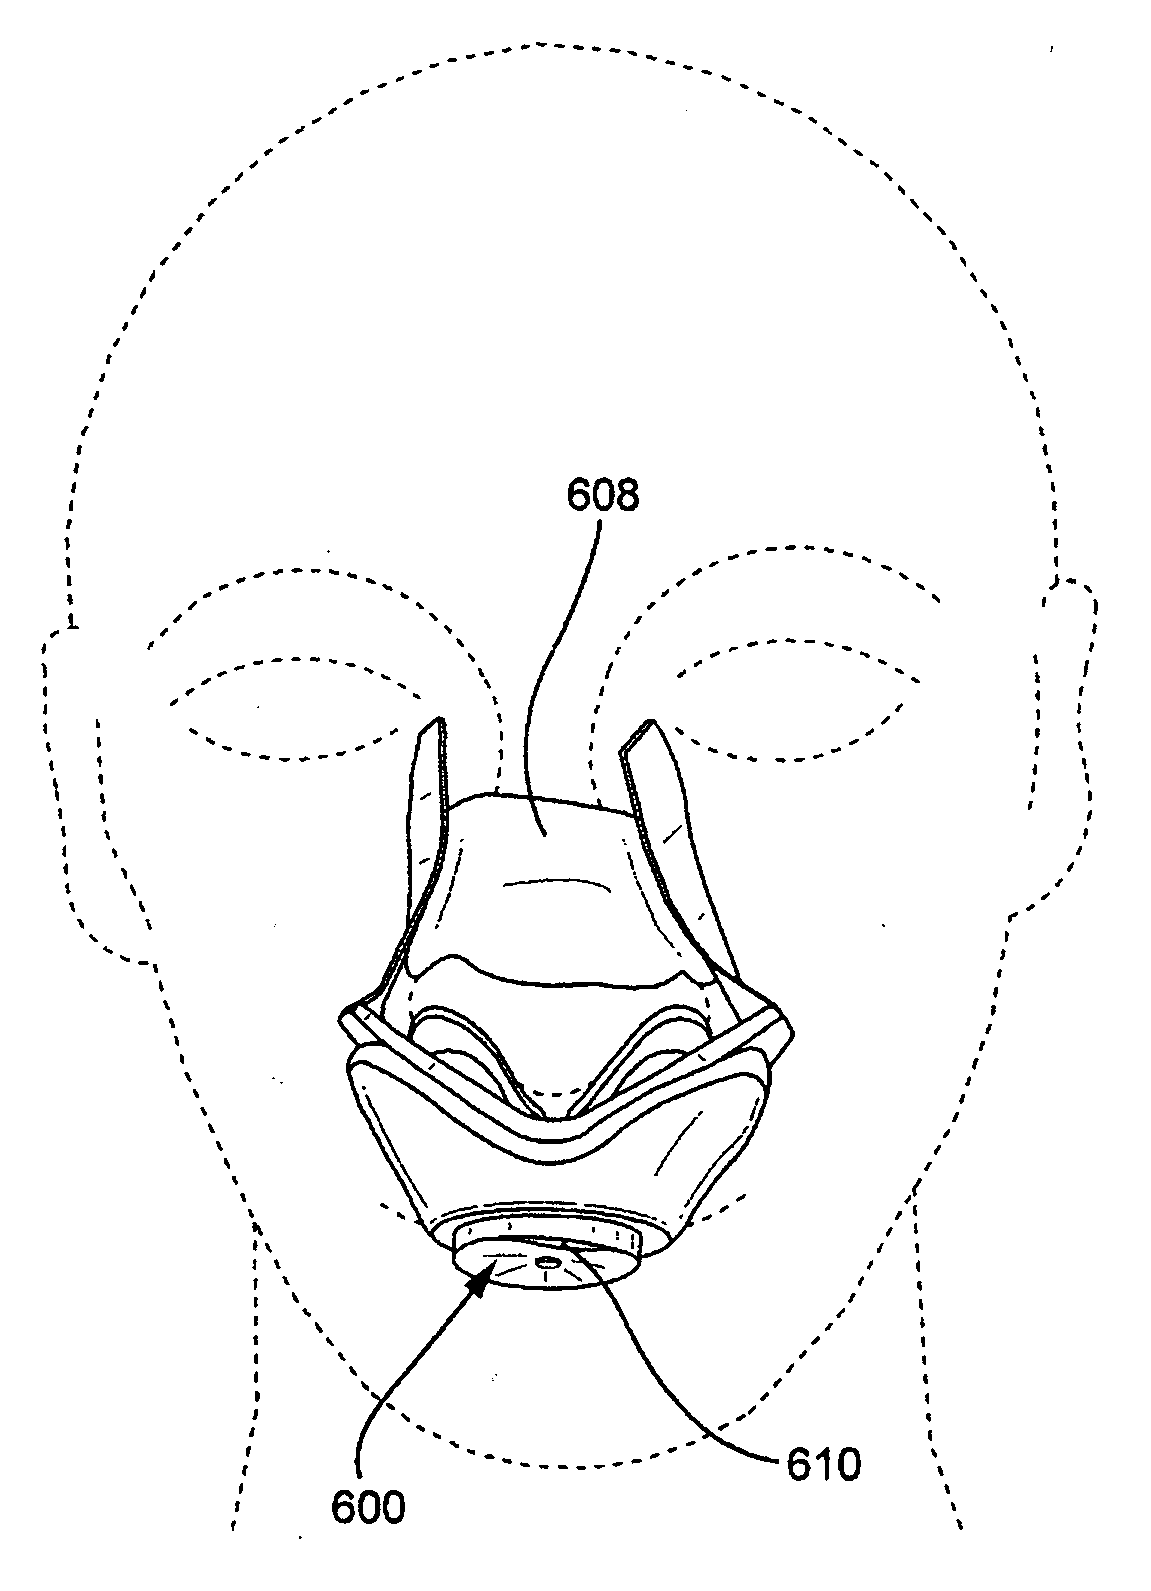 Respiratory resistance systems and methods